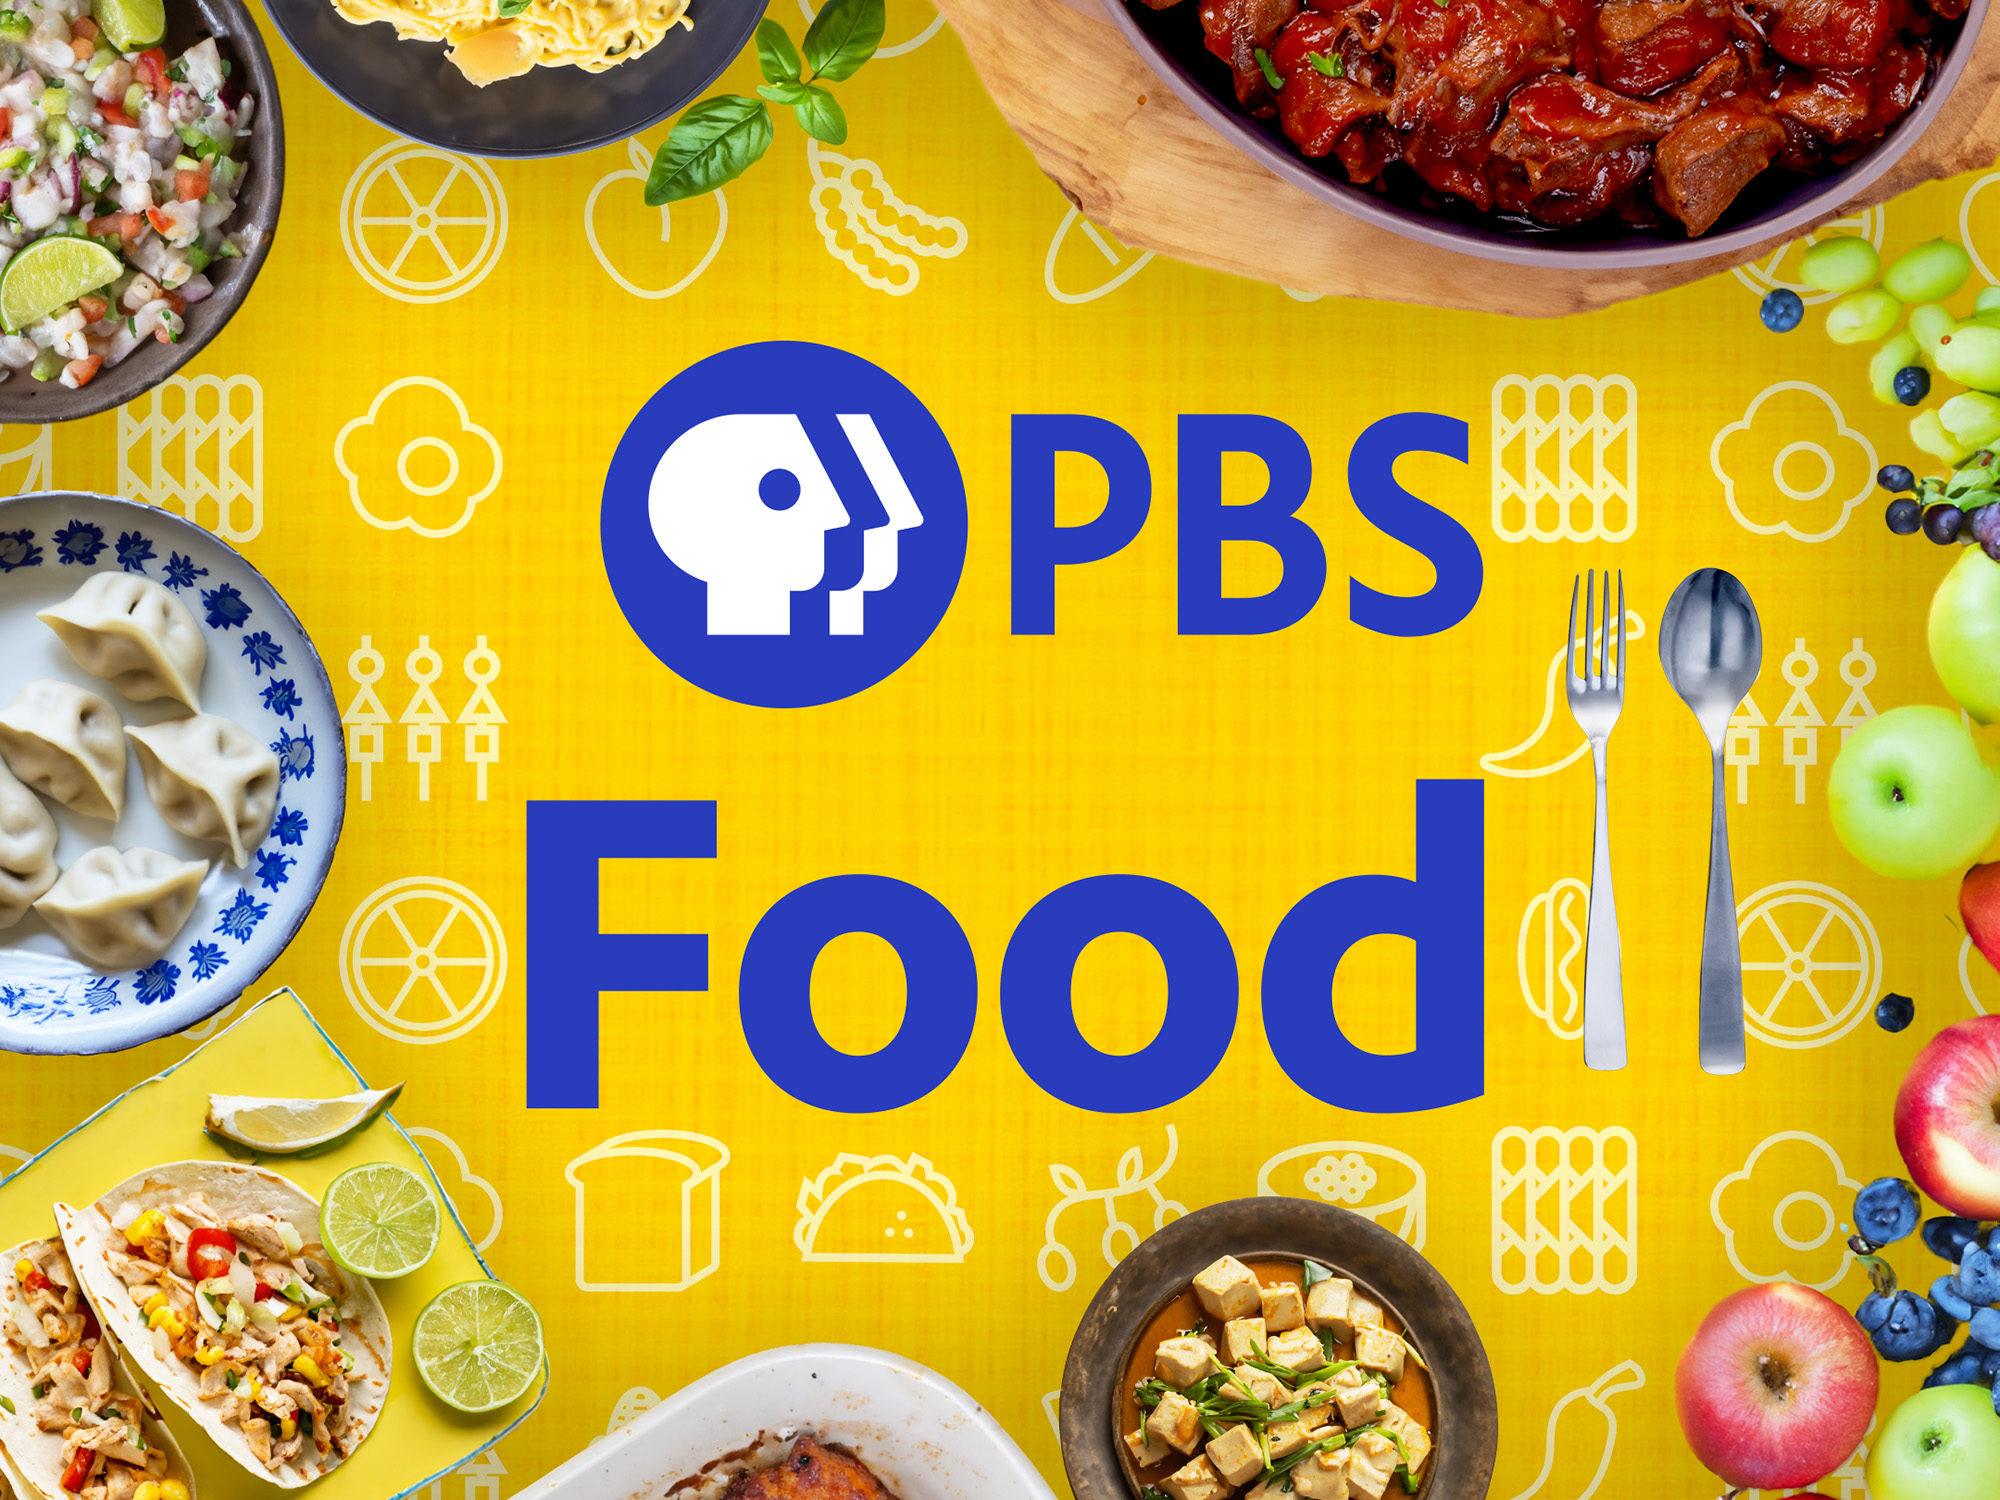 A graphic showing the PBS Food logo.